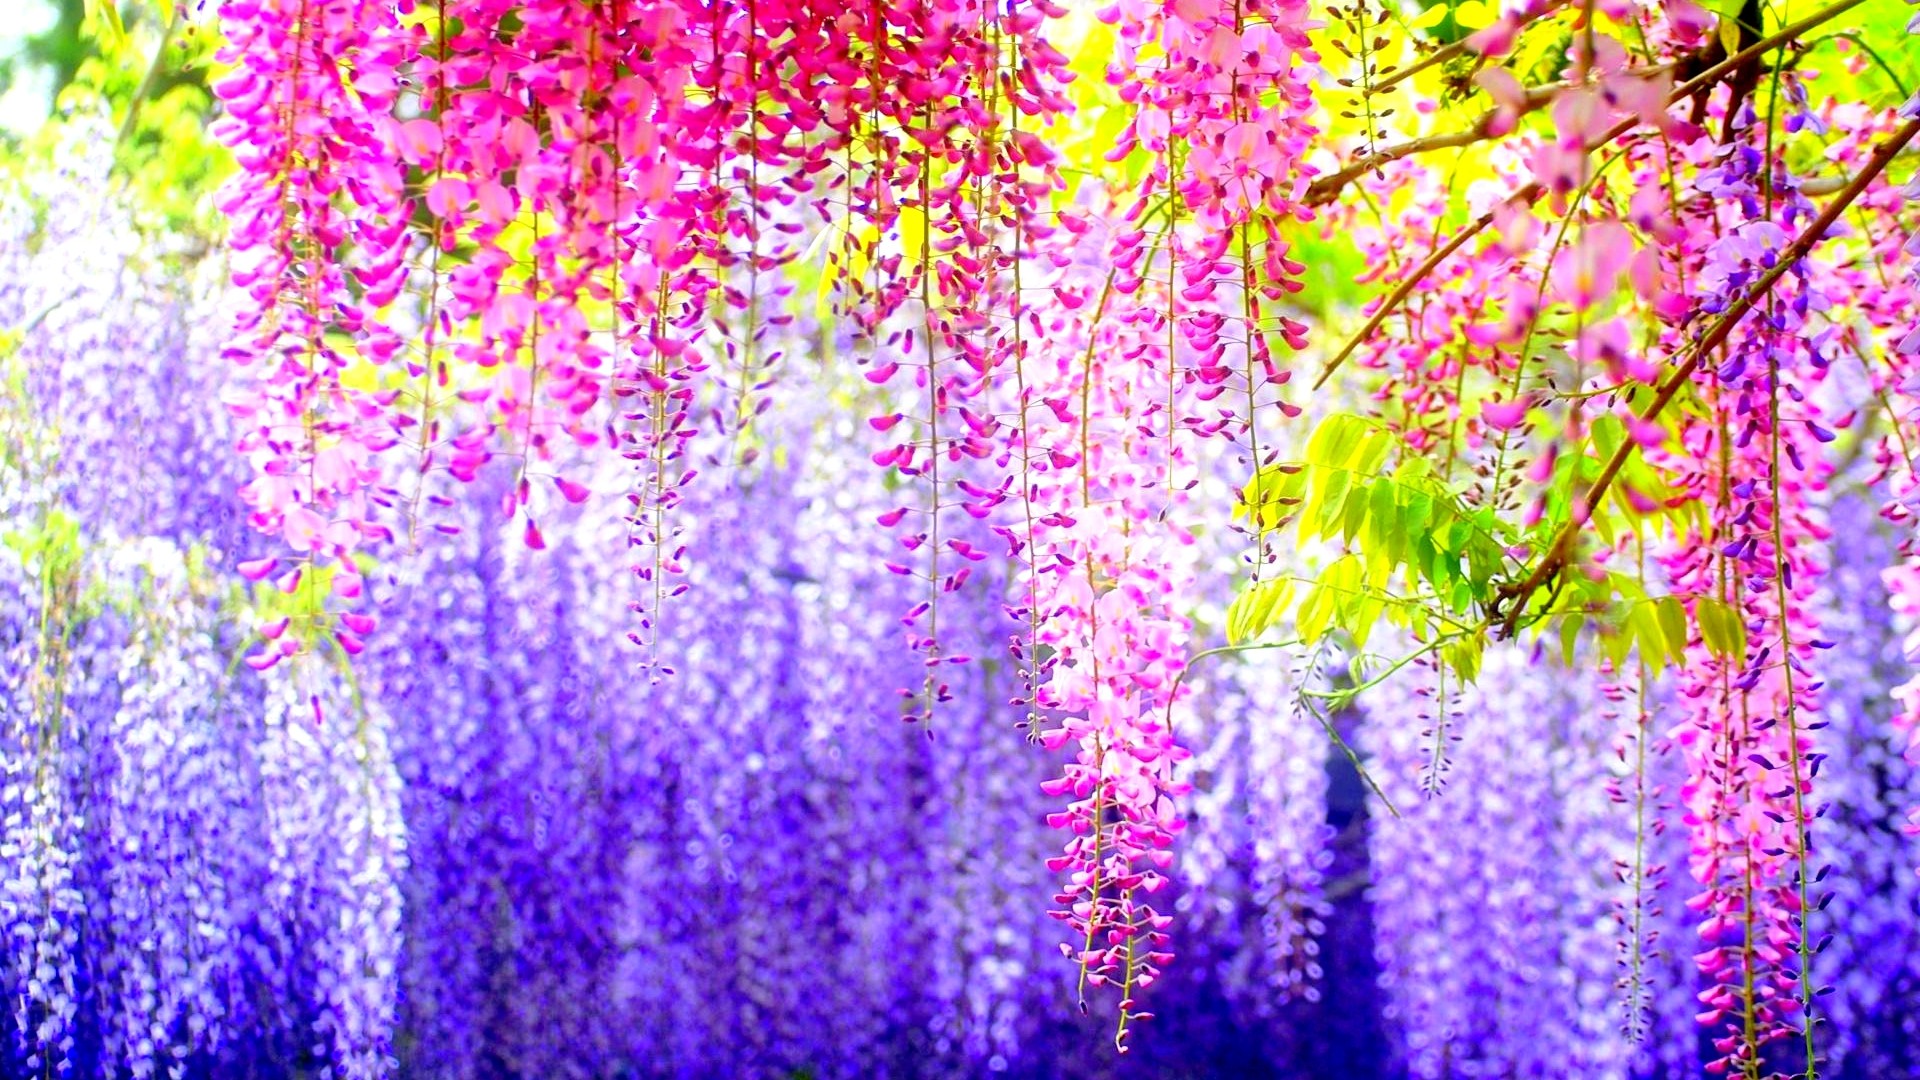 Nature flowers blossoms colors trees wallpaper | 1920x1080 | 22492 ...